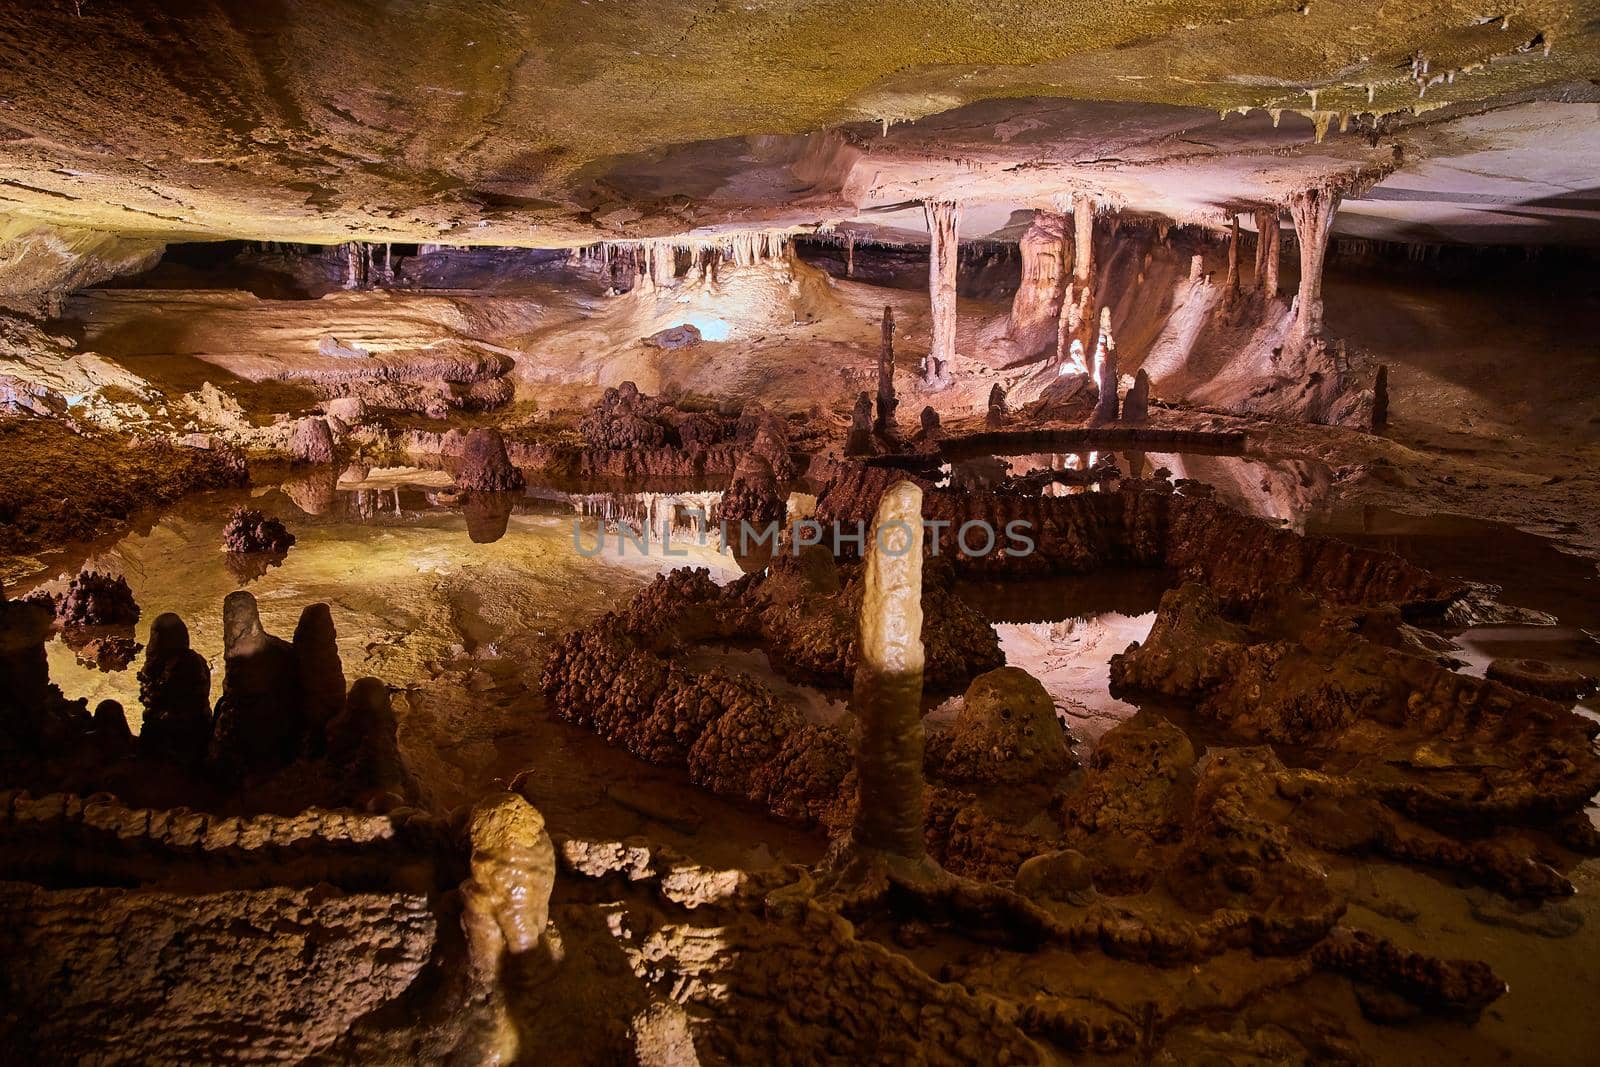 View of large open cave filled with reflective waters, stalagmites and stalactites by njproductions